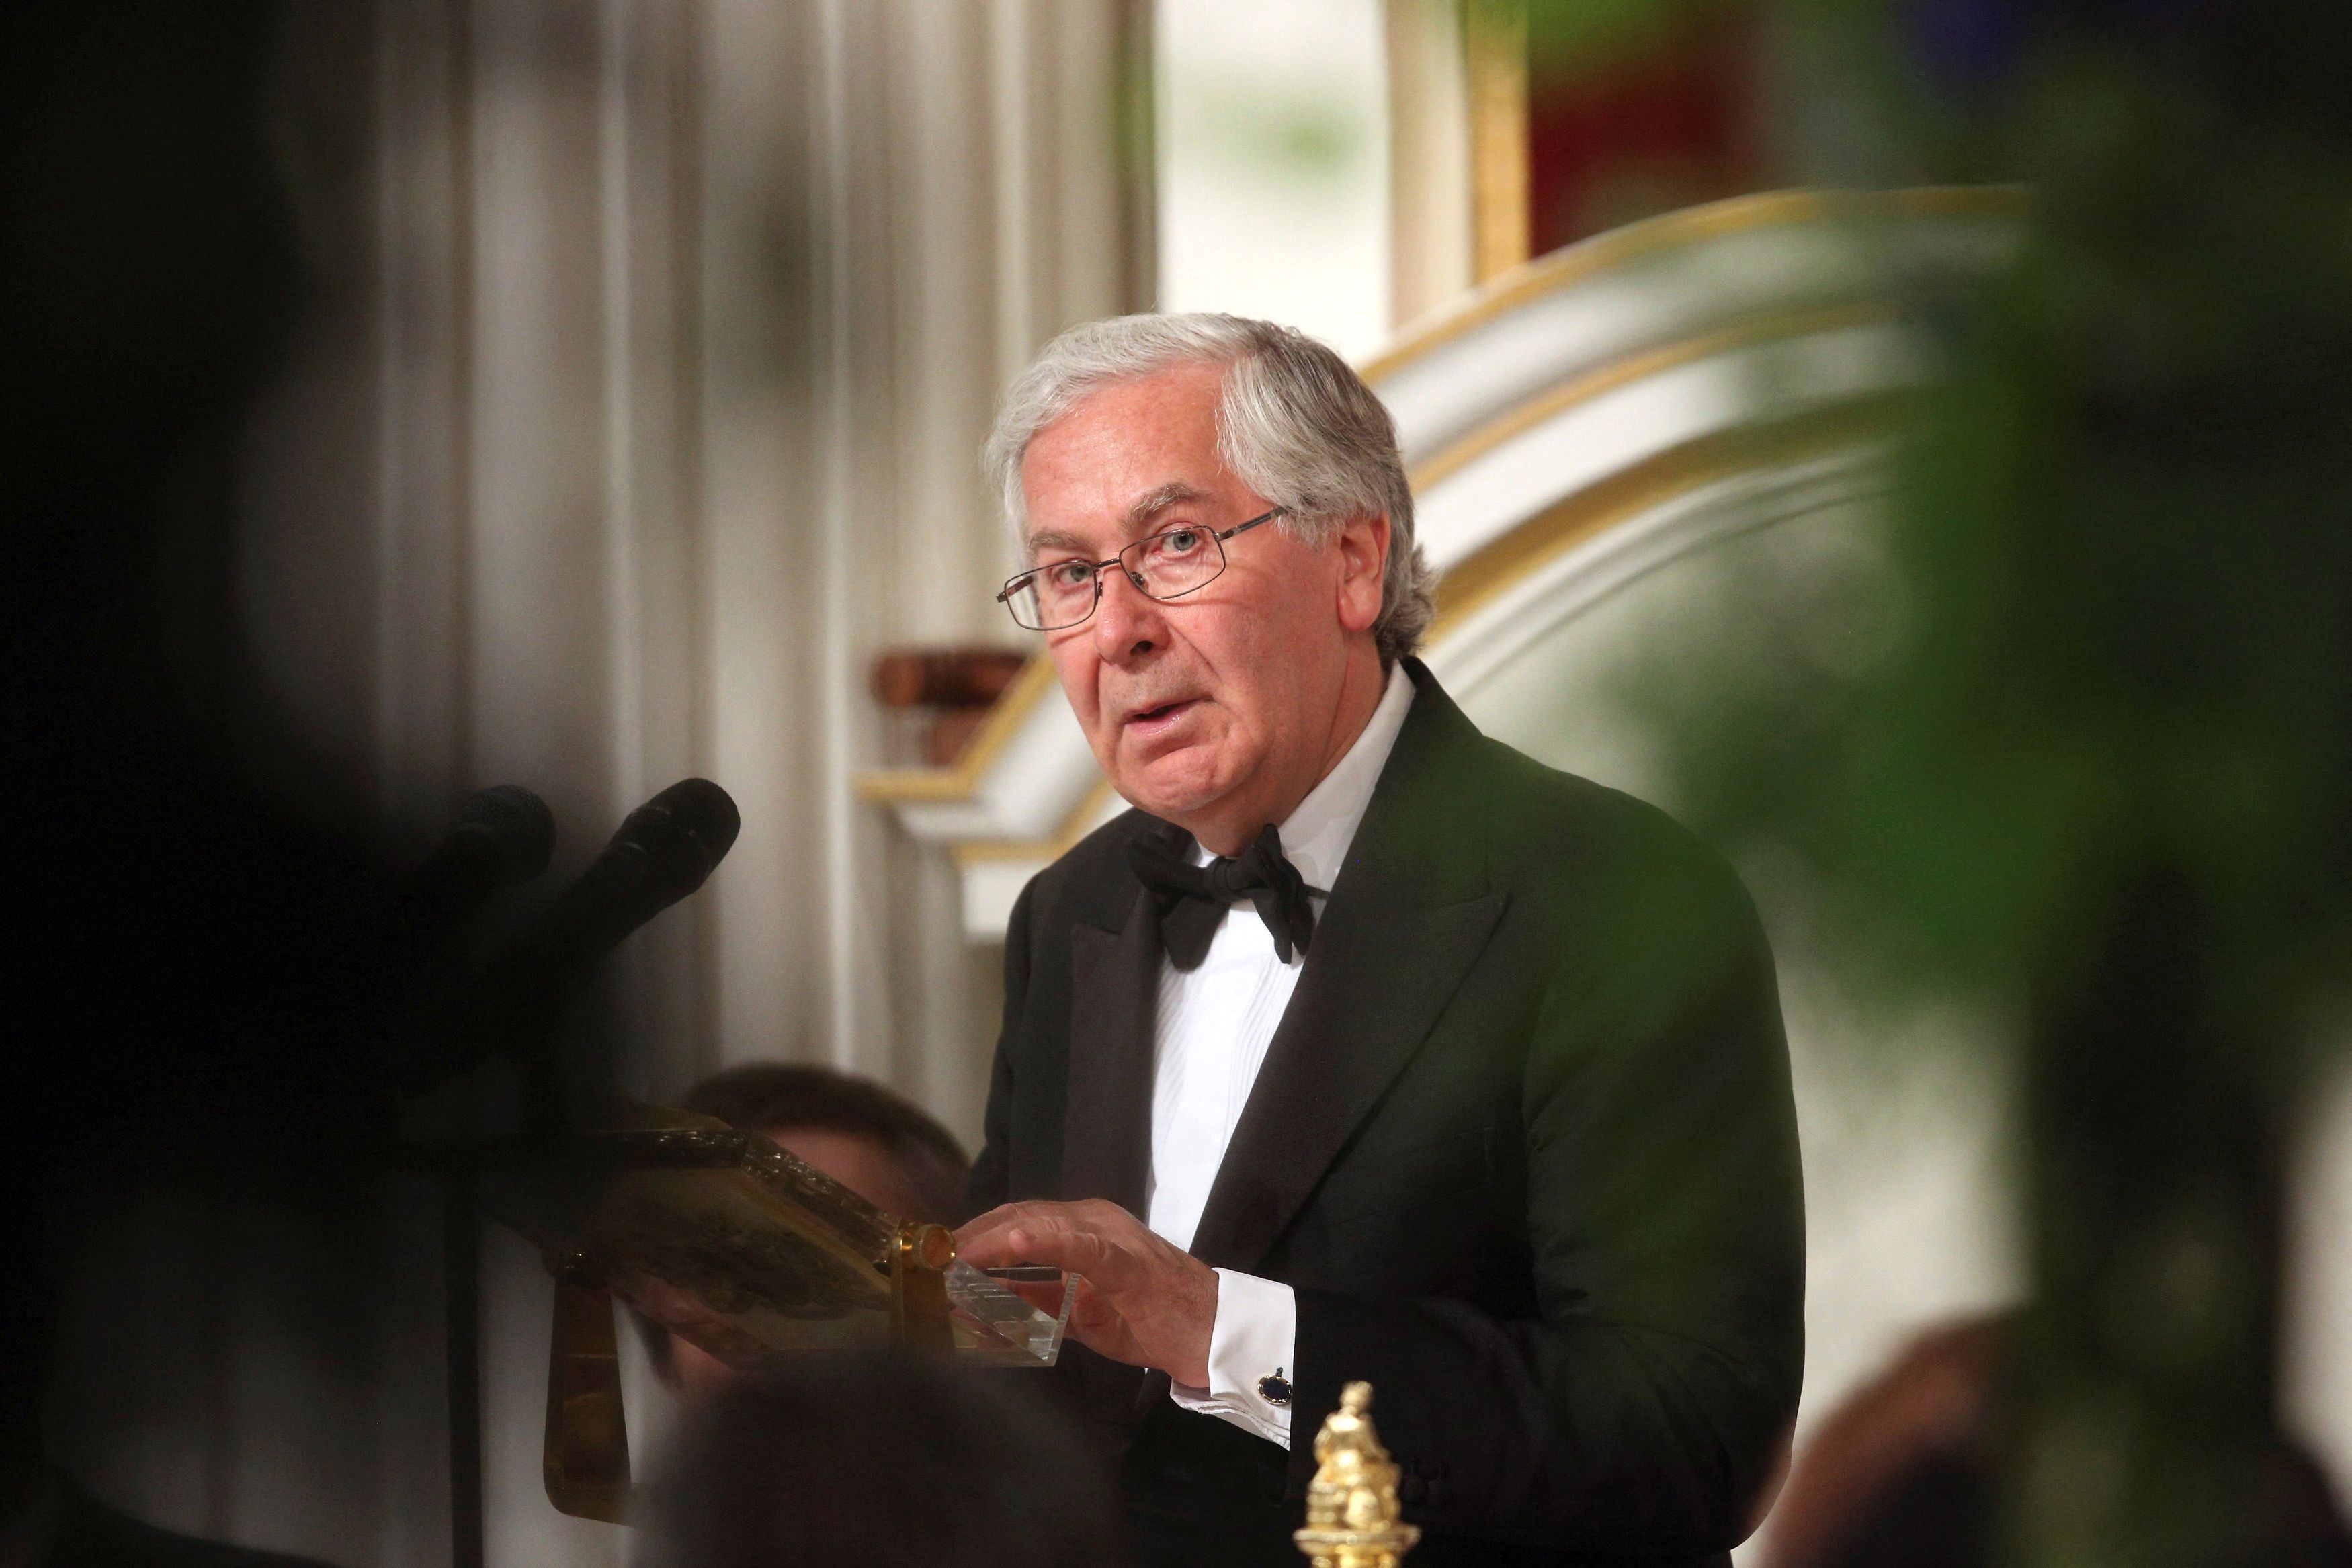 Mervyn King addresses the audience of the 'Lord Mayor's Dinner to the Bankers and Merchants of the City of London' at the Mansion House in London